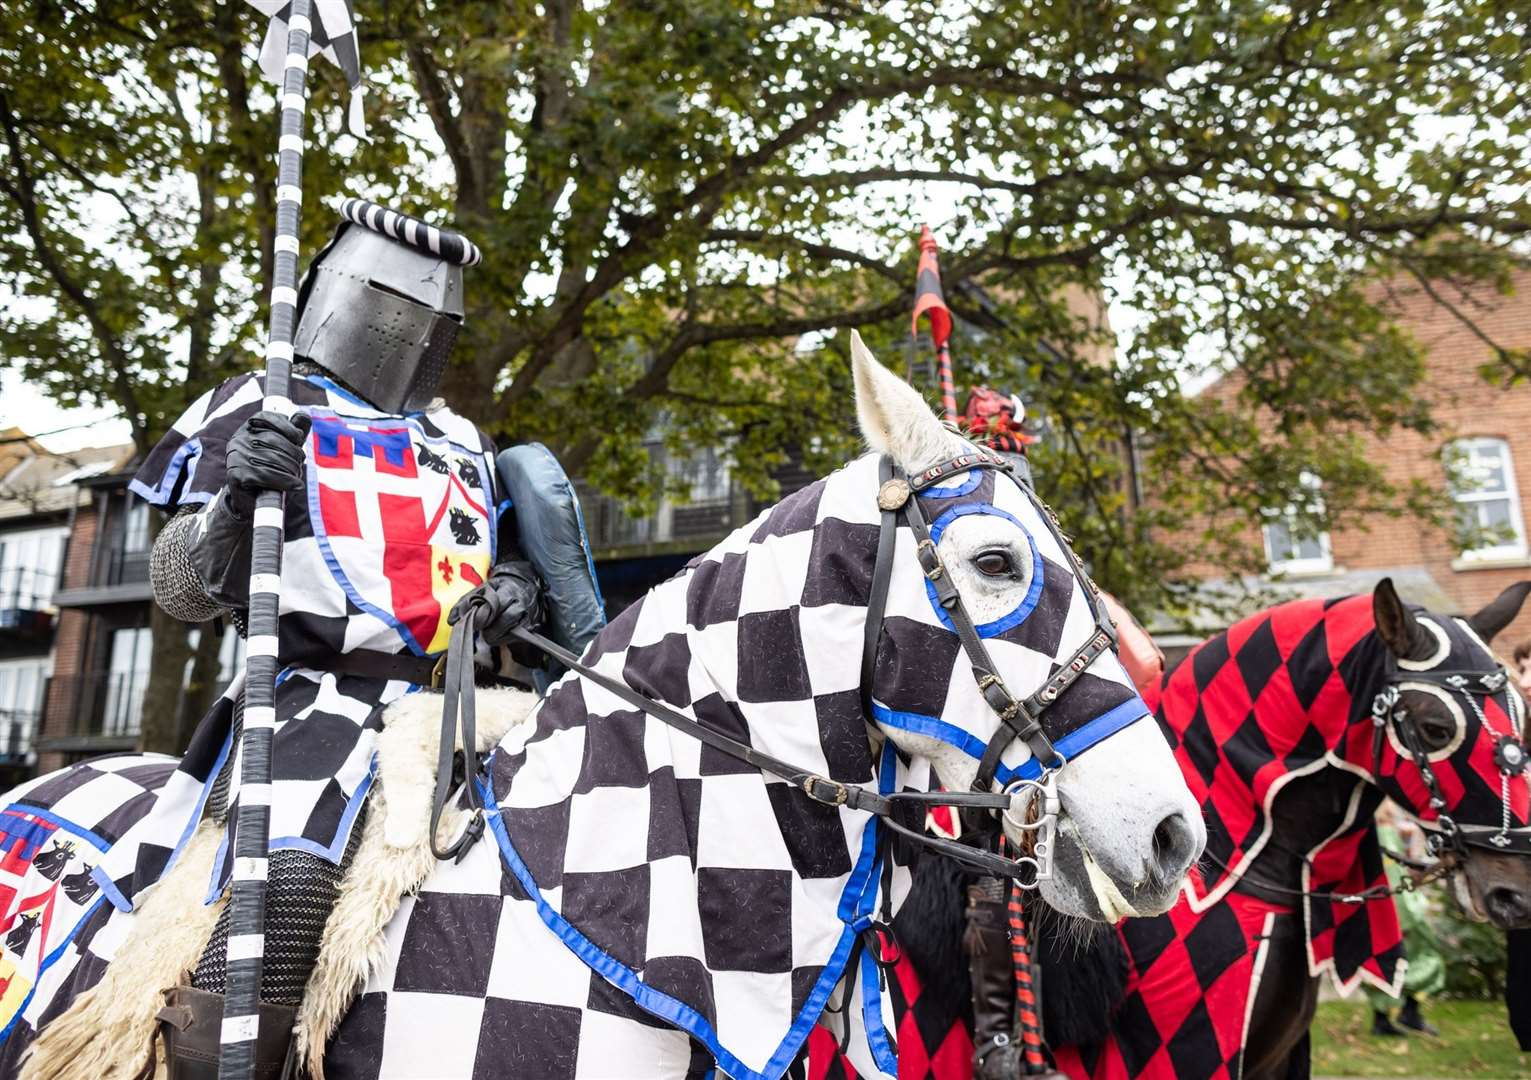 There will be many medieval-themed activities happening throughout the city. Picture: Matt Wilson